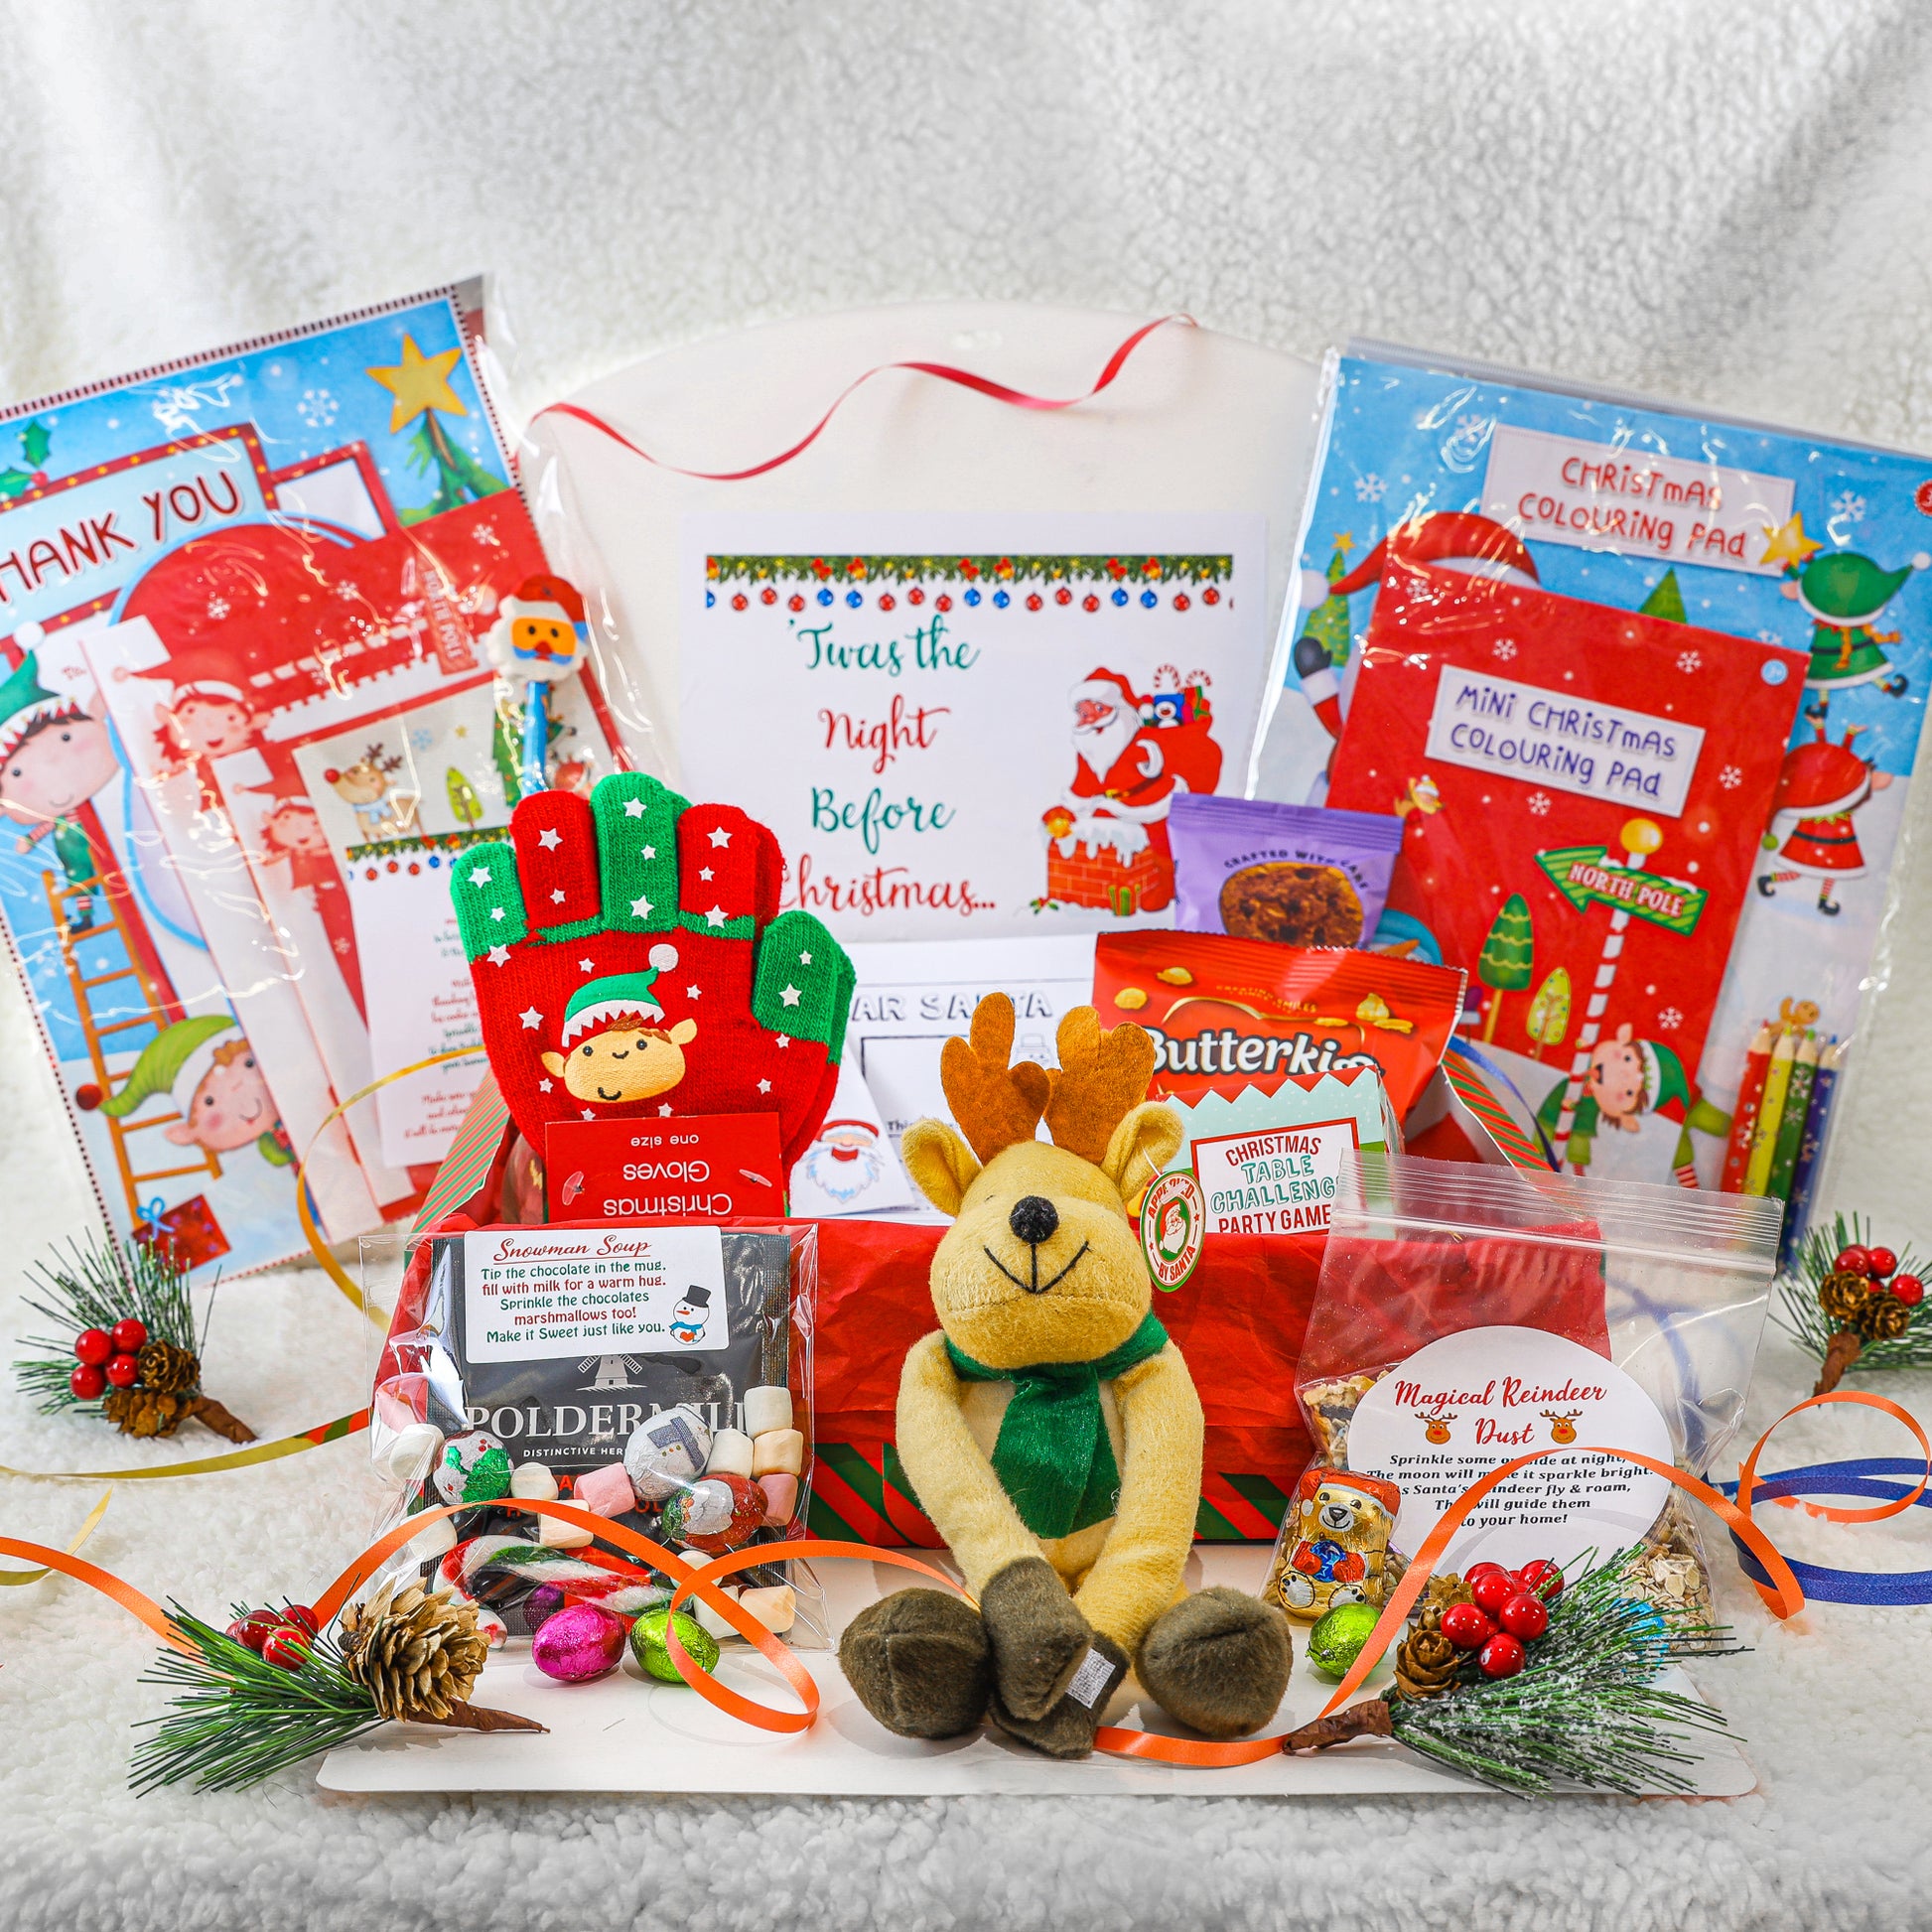 Personalised Christmas Eve Box Filled with Activities and Fun for Kids  - Always Looking Good - Christmas Eve Box With Christmas Hanging Toy  